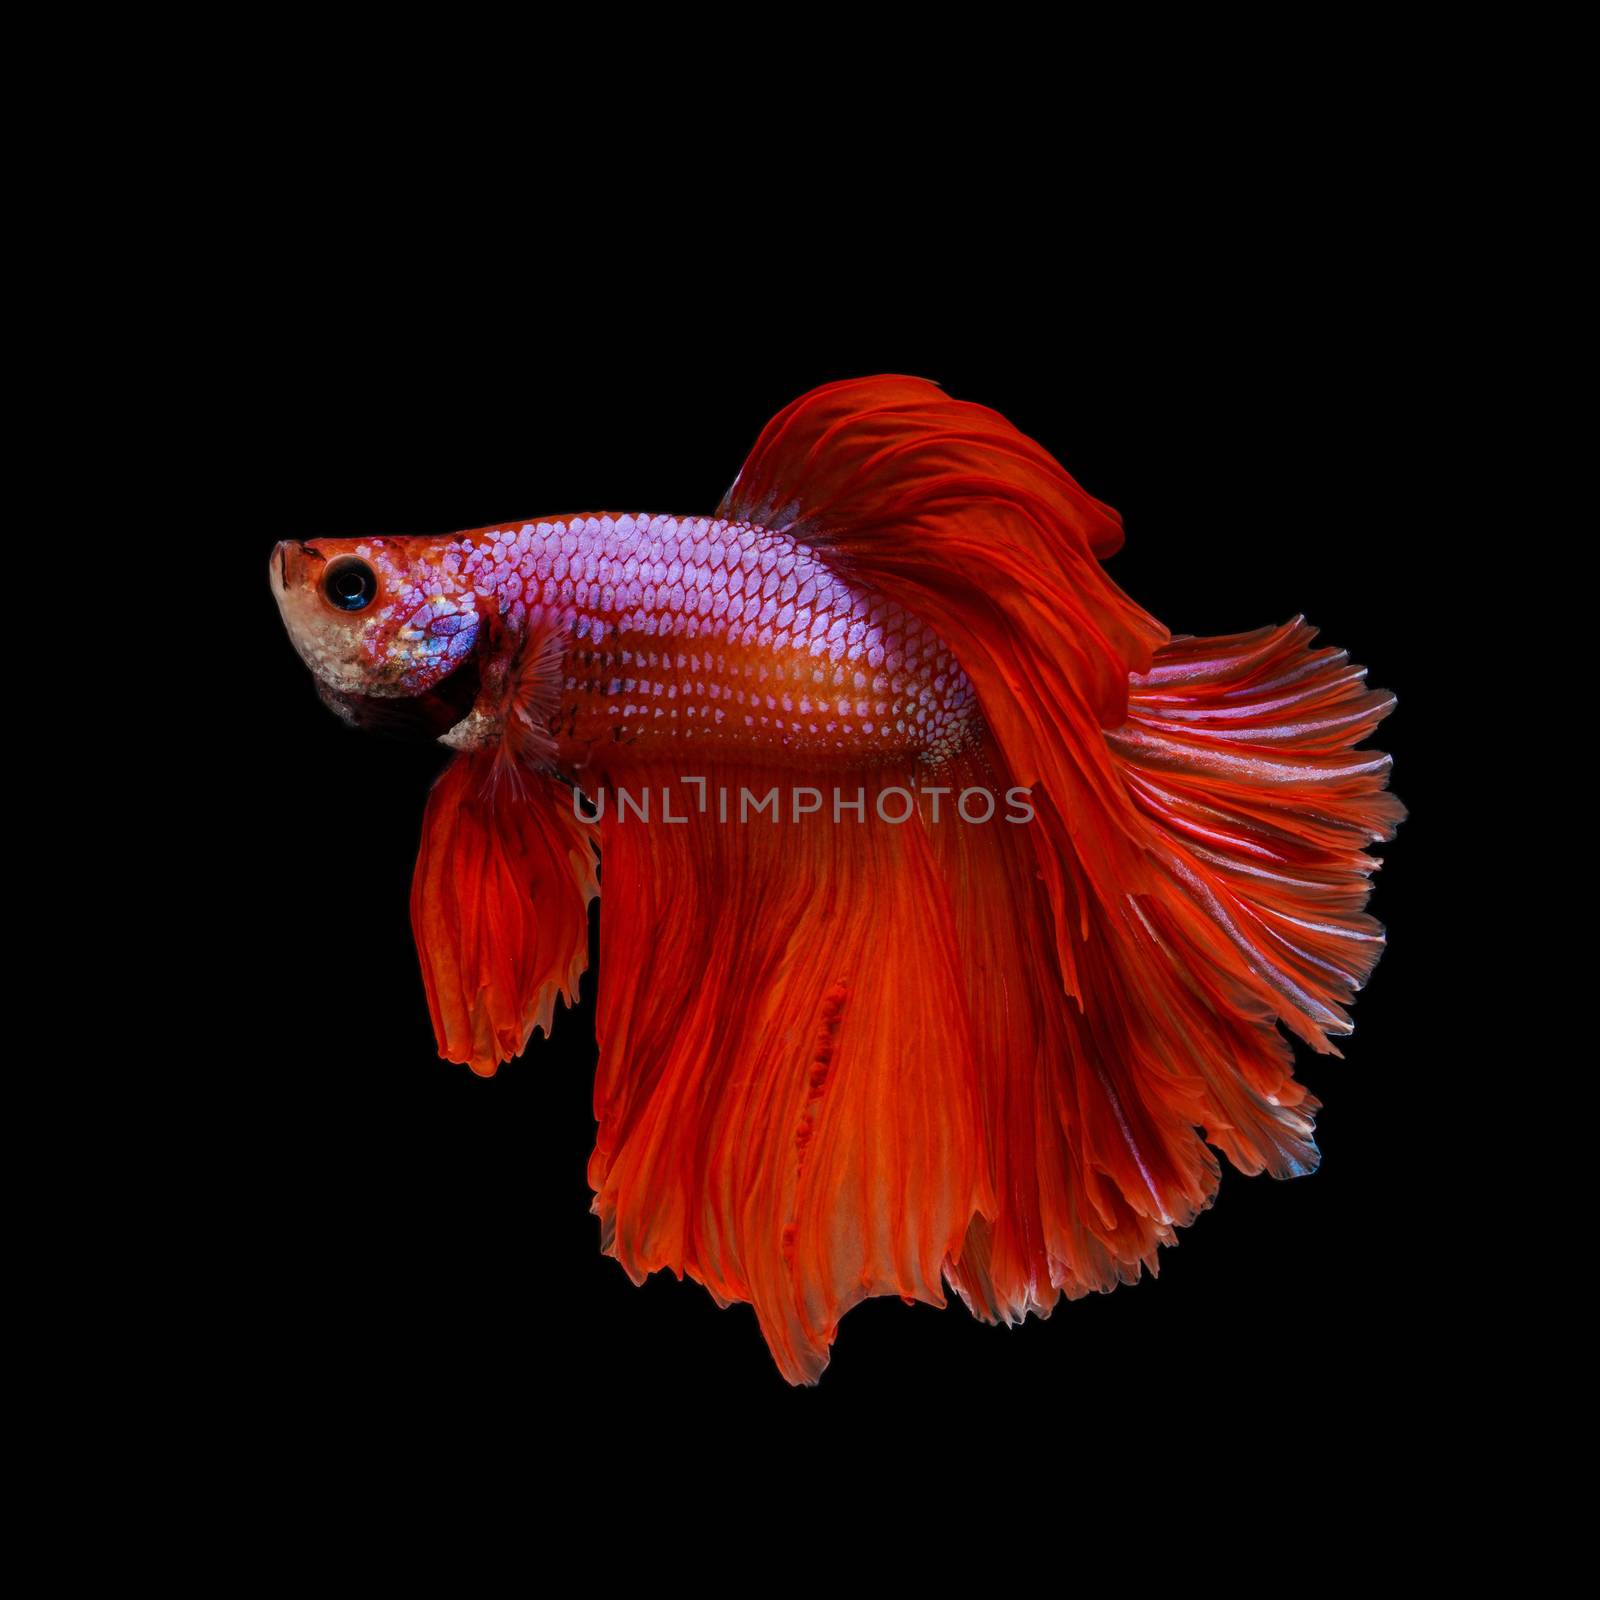 Siamese fighting fish is the freshwater fish with beautiful fins and color by chadchai_k